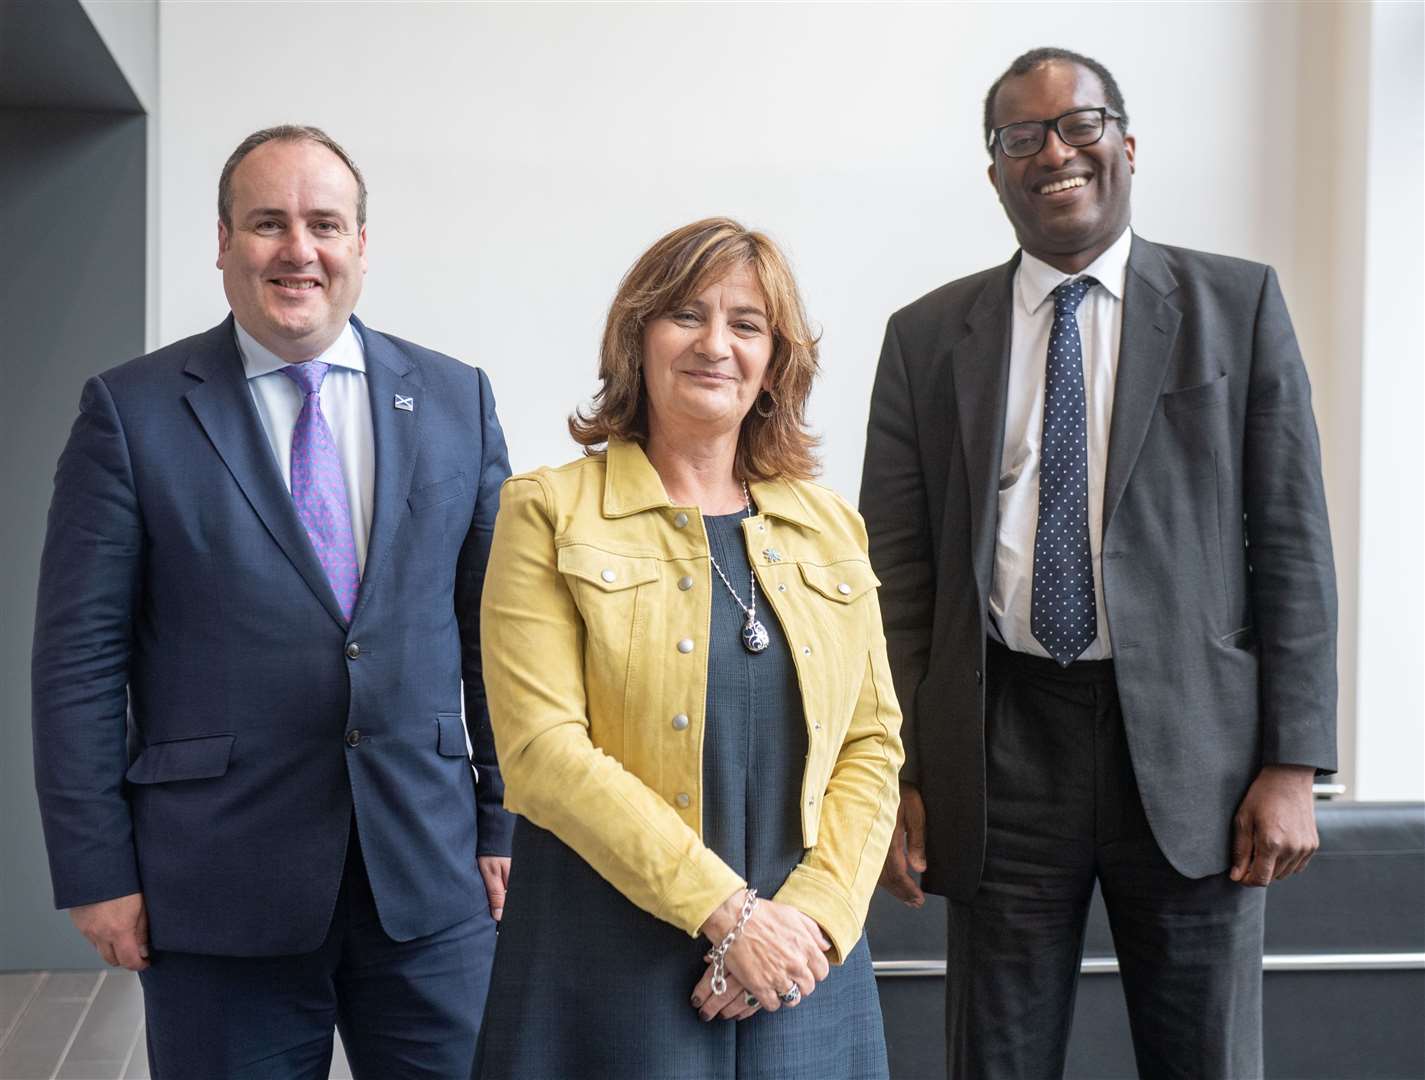 Announcing the launch of the Net Zero Technology Centre (from left) Scottish energy minister Paul Wheelhouse, Oil & Gas Technology Centre chief executive Colette Cohen and UK energy minister Kwasi Kwarteng.